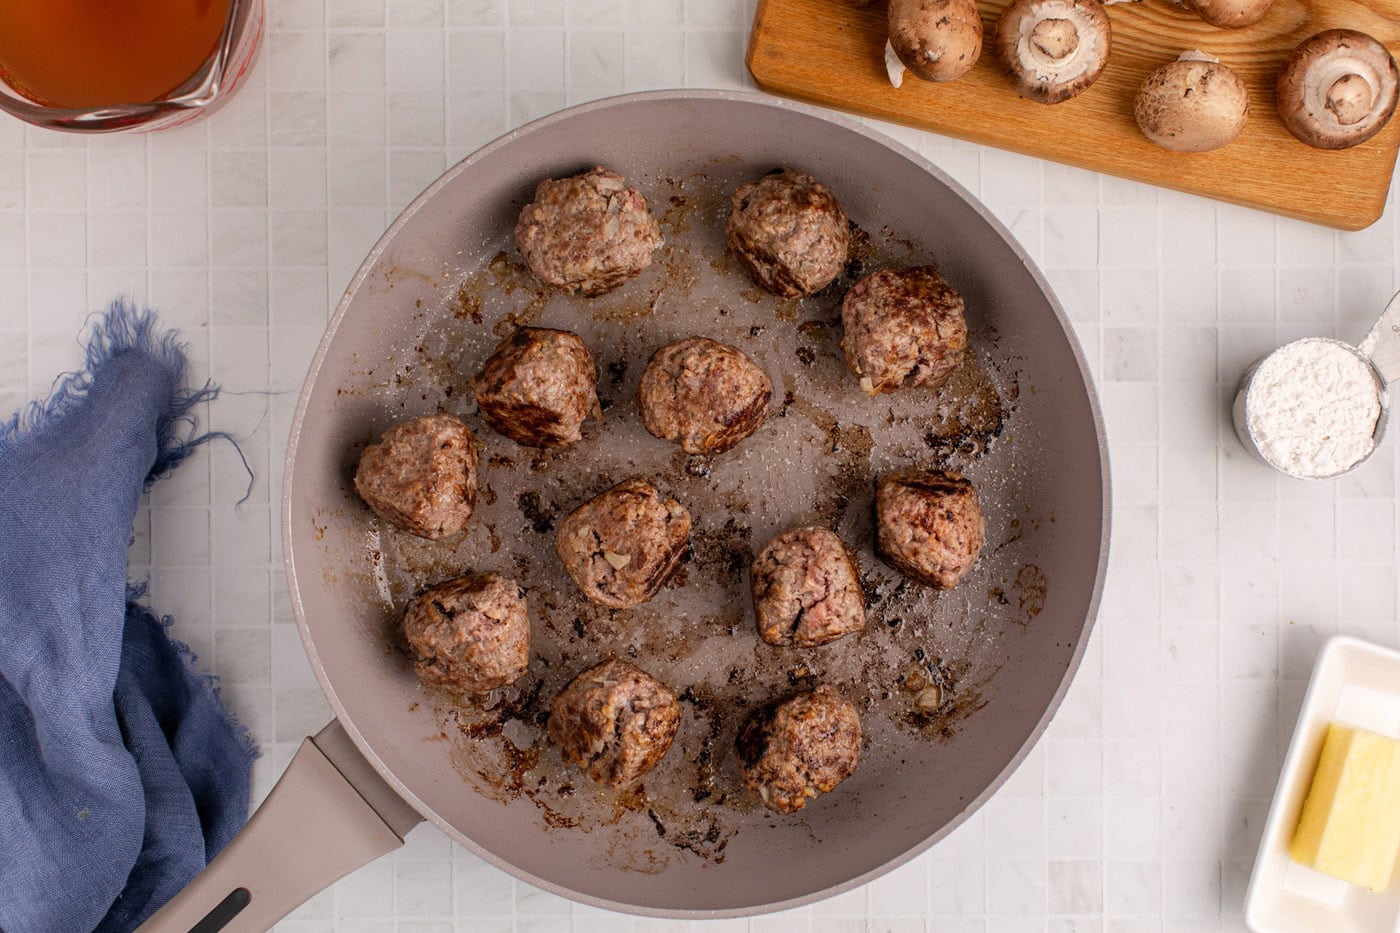 cooking meatballs in a skillet